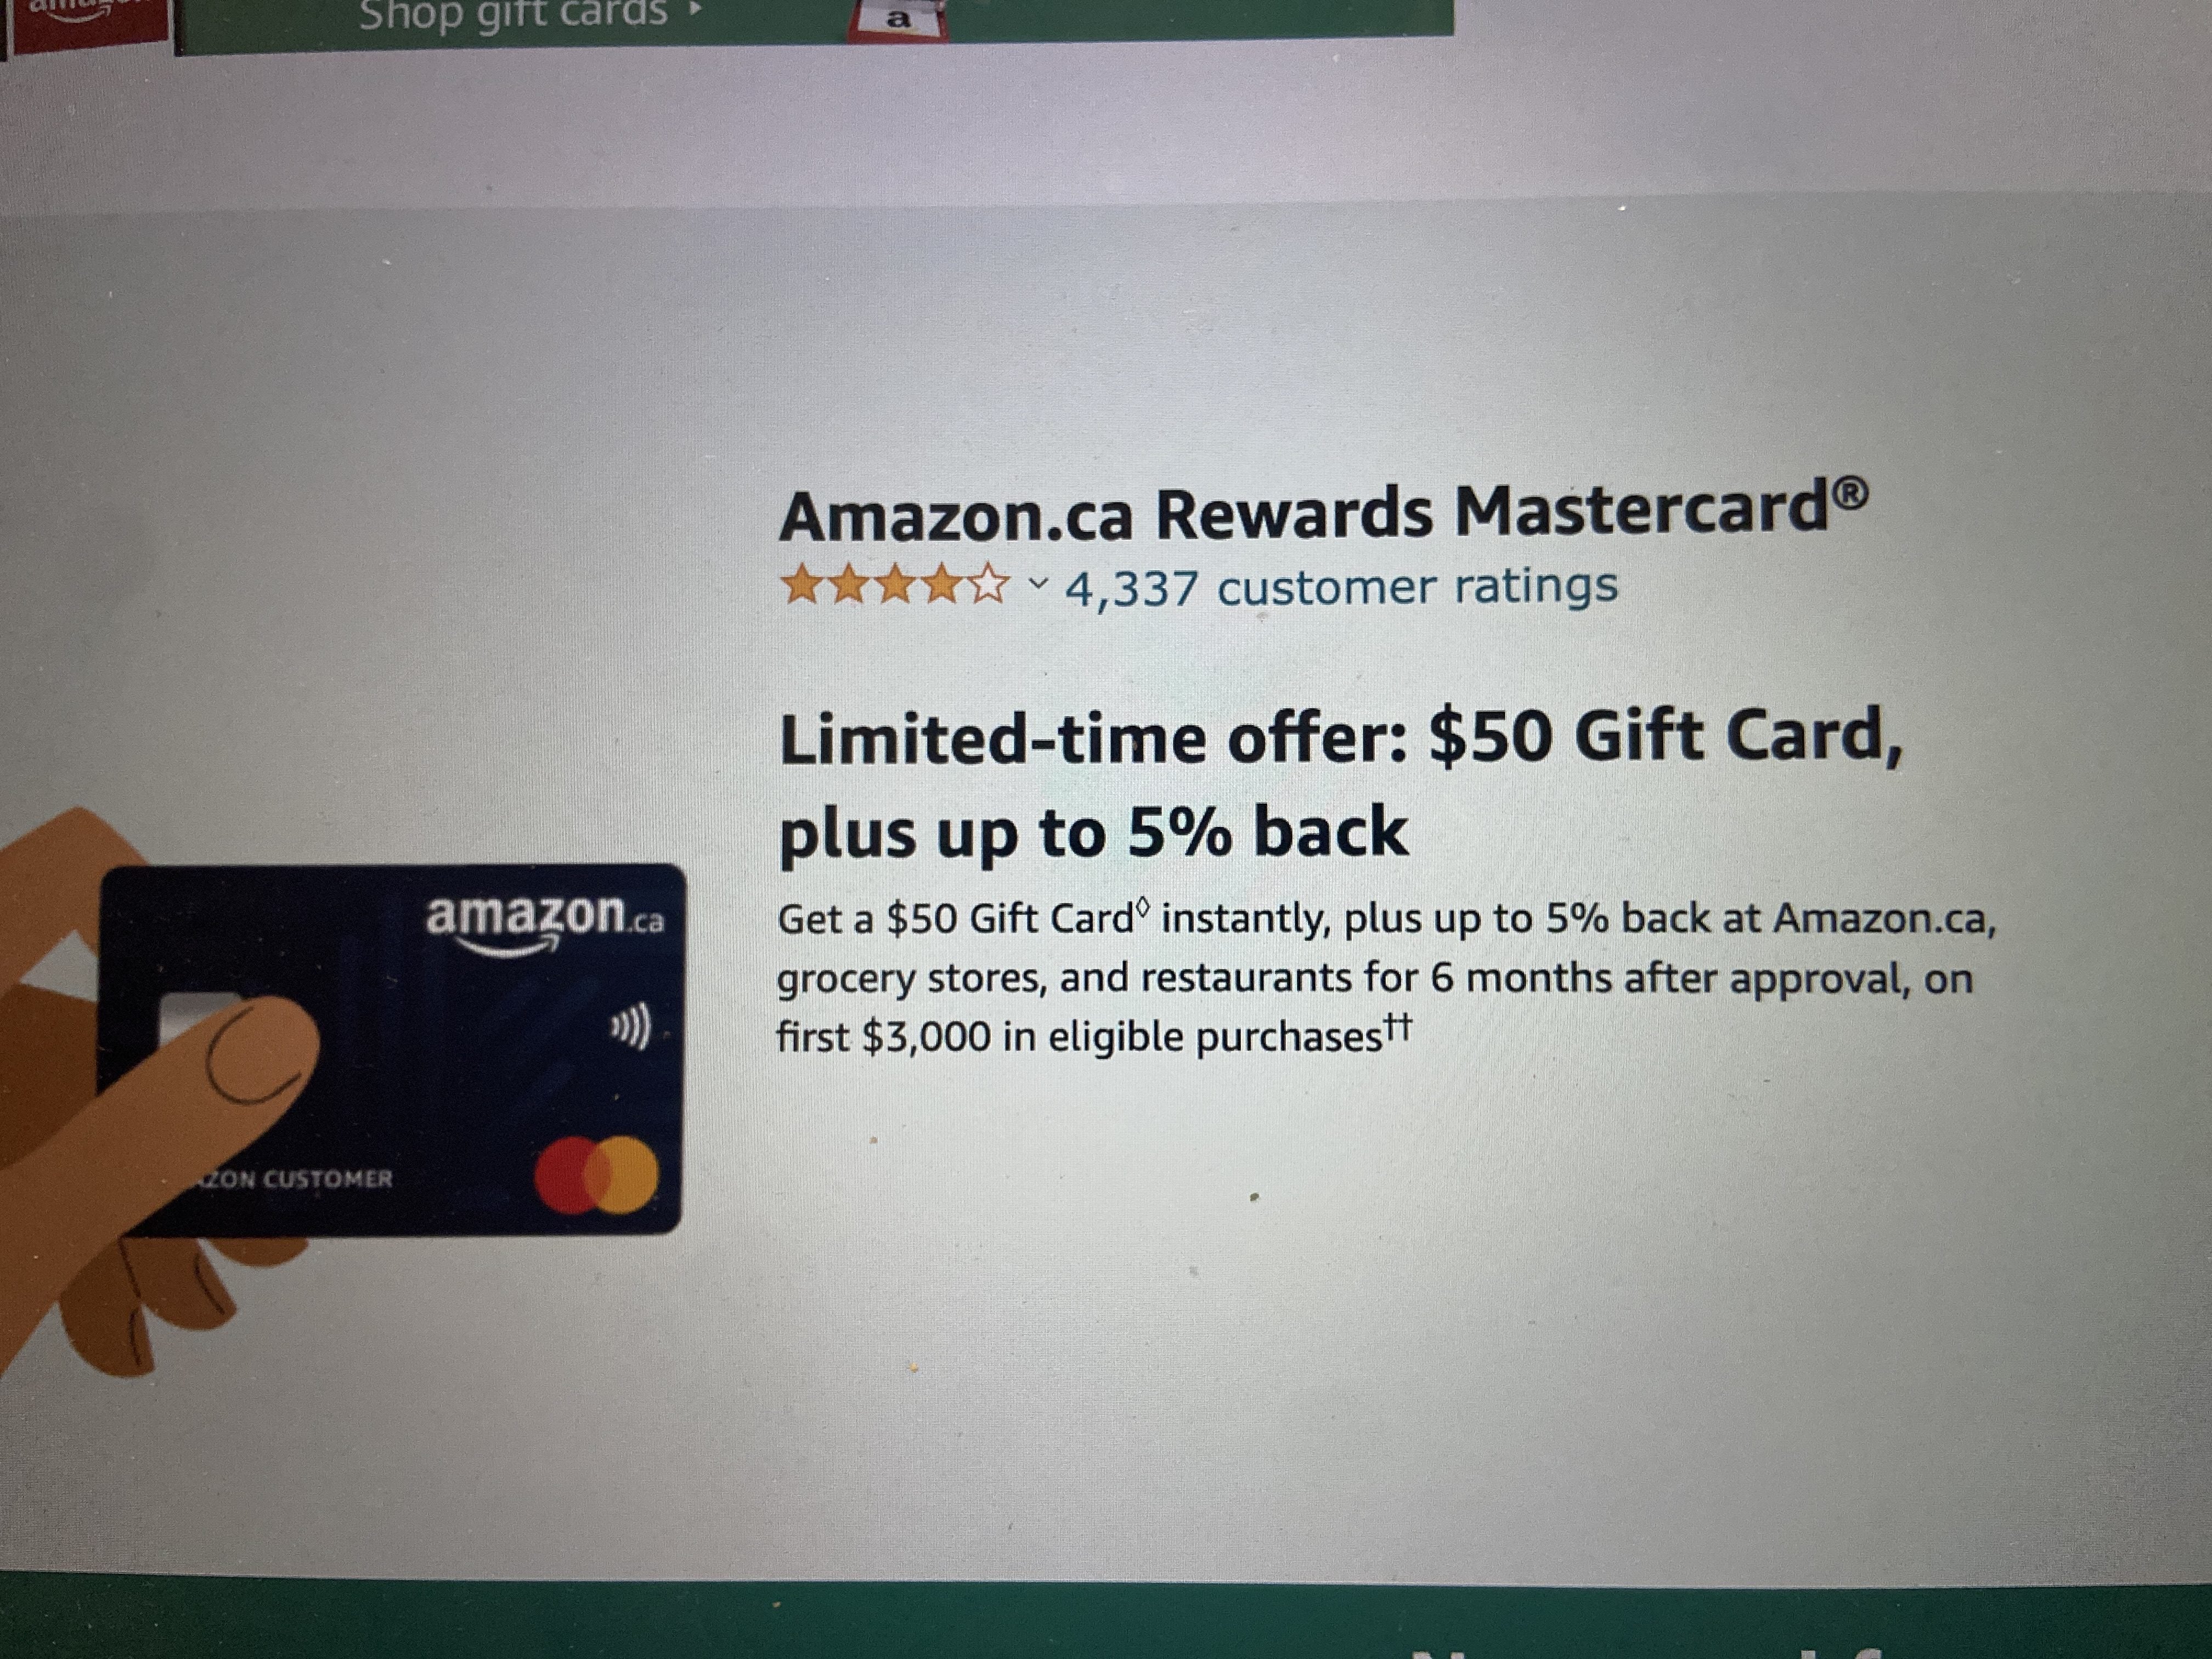 Expired] American Express Amazon Prime Business Card - Bonus Increased To  $225 - Doctor Of Credit